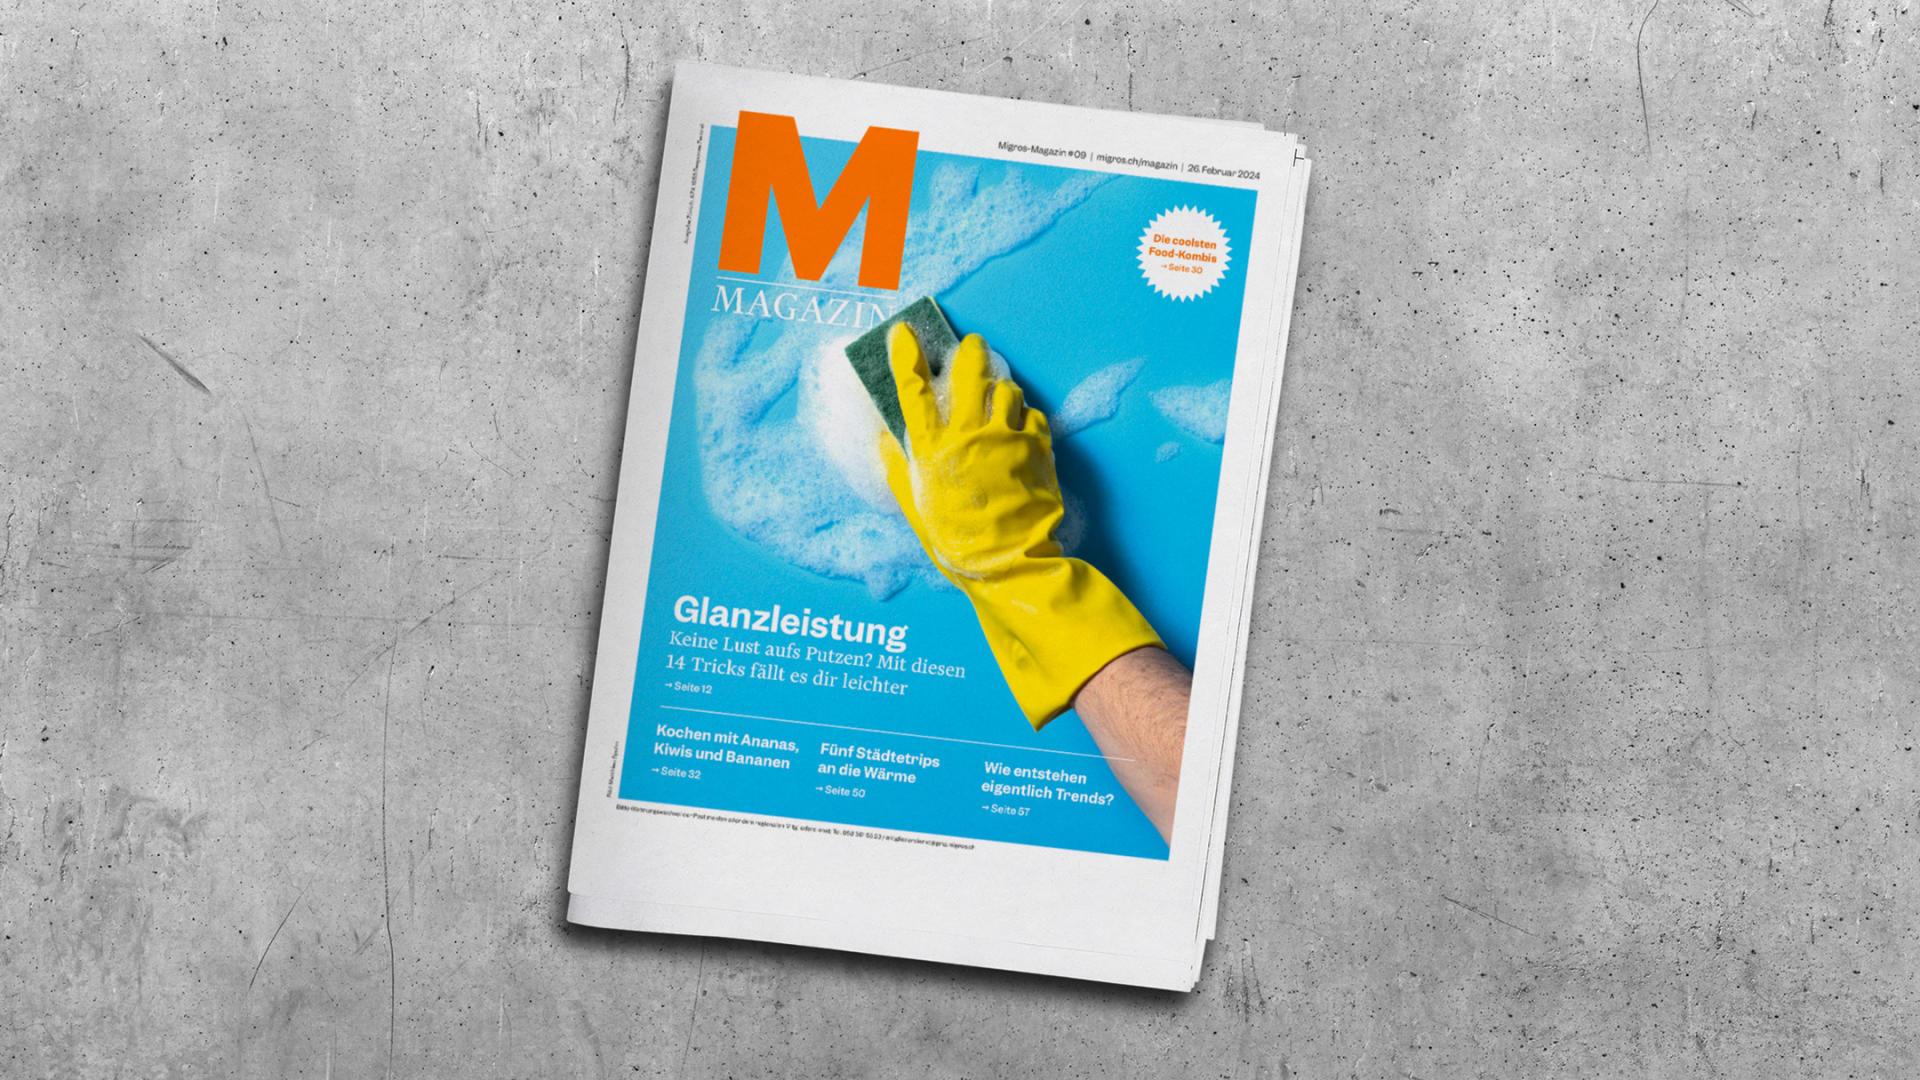 An issue of Migros magazine on a grey table.